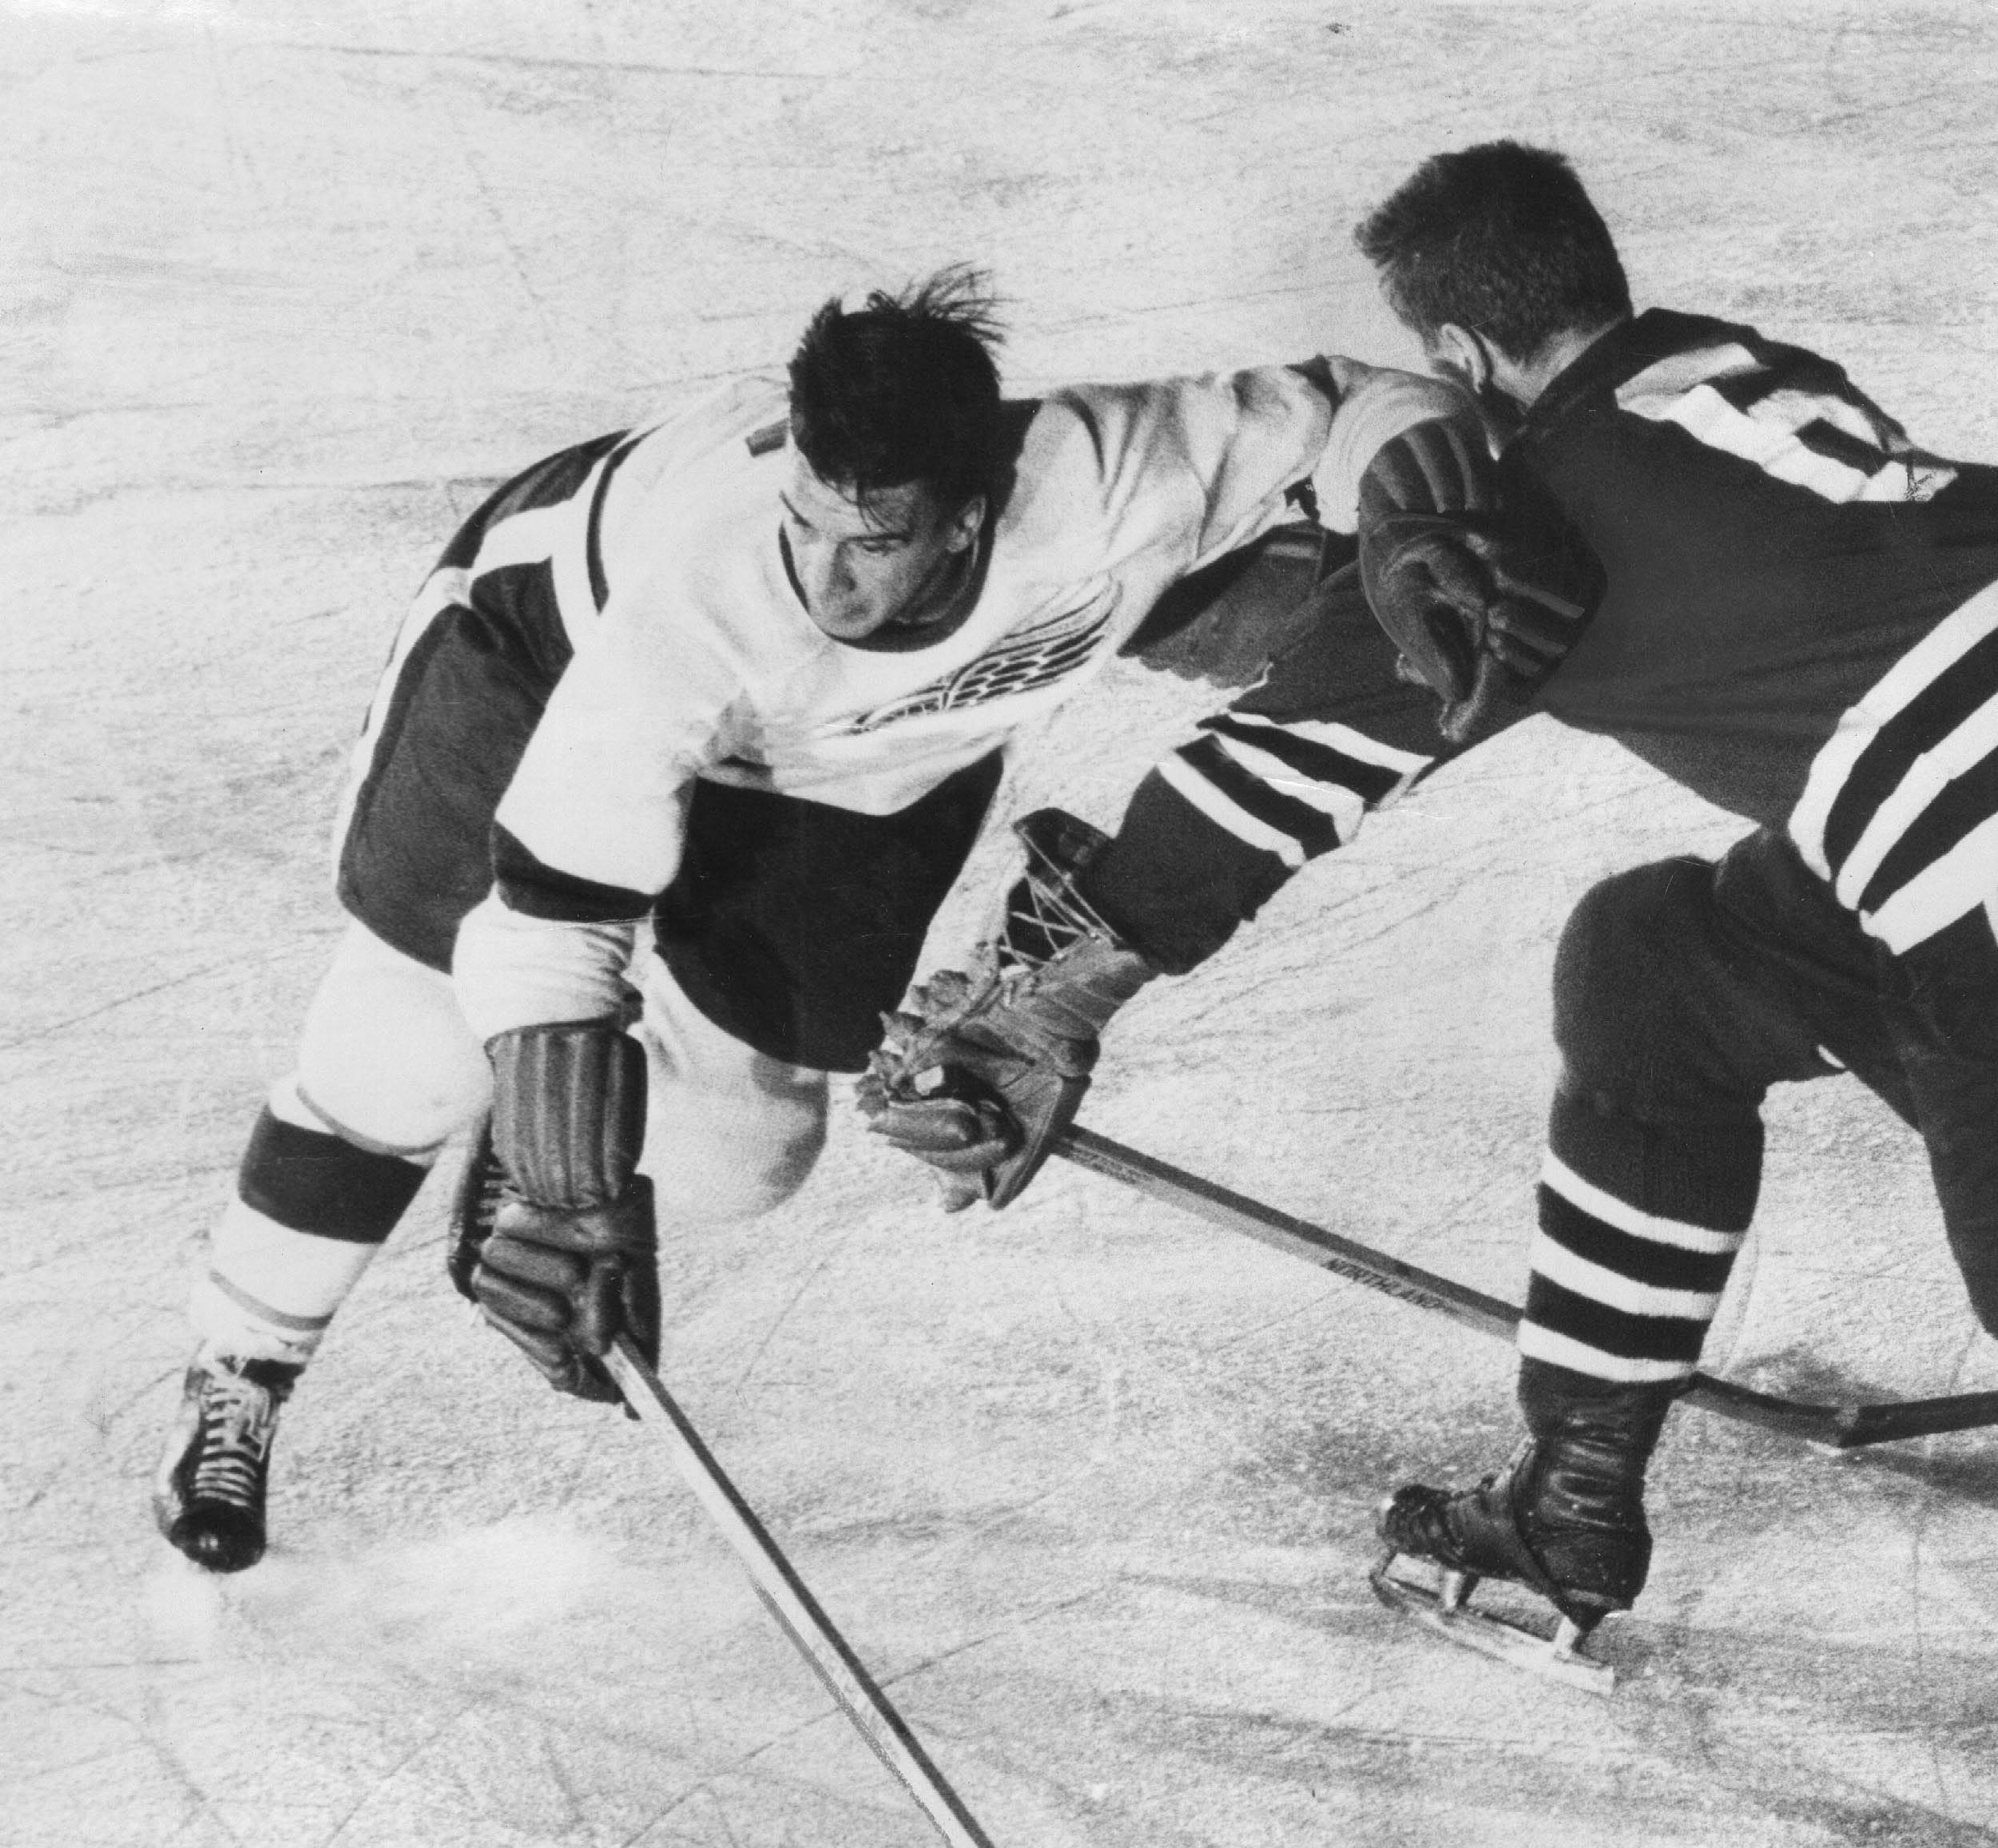 The final tally for Ted Lindsay’s career: 379 goals, 851 points, 1,808 penalty minutes, about 300 stitches.